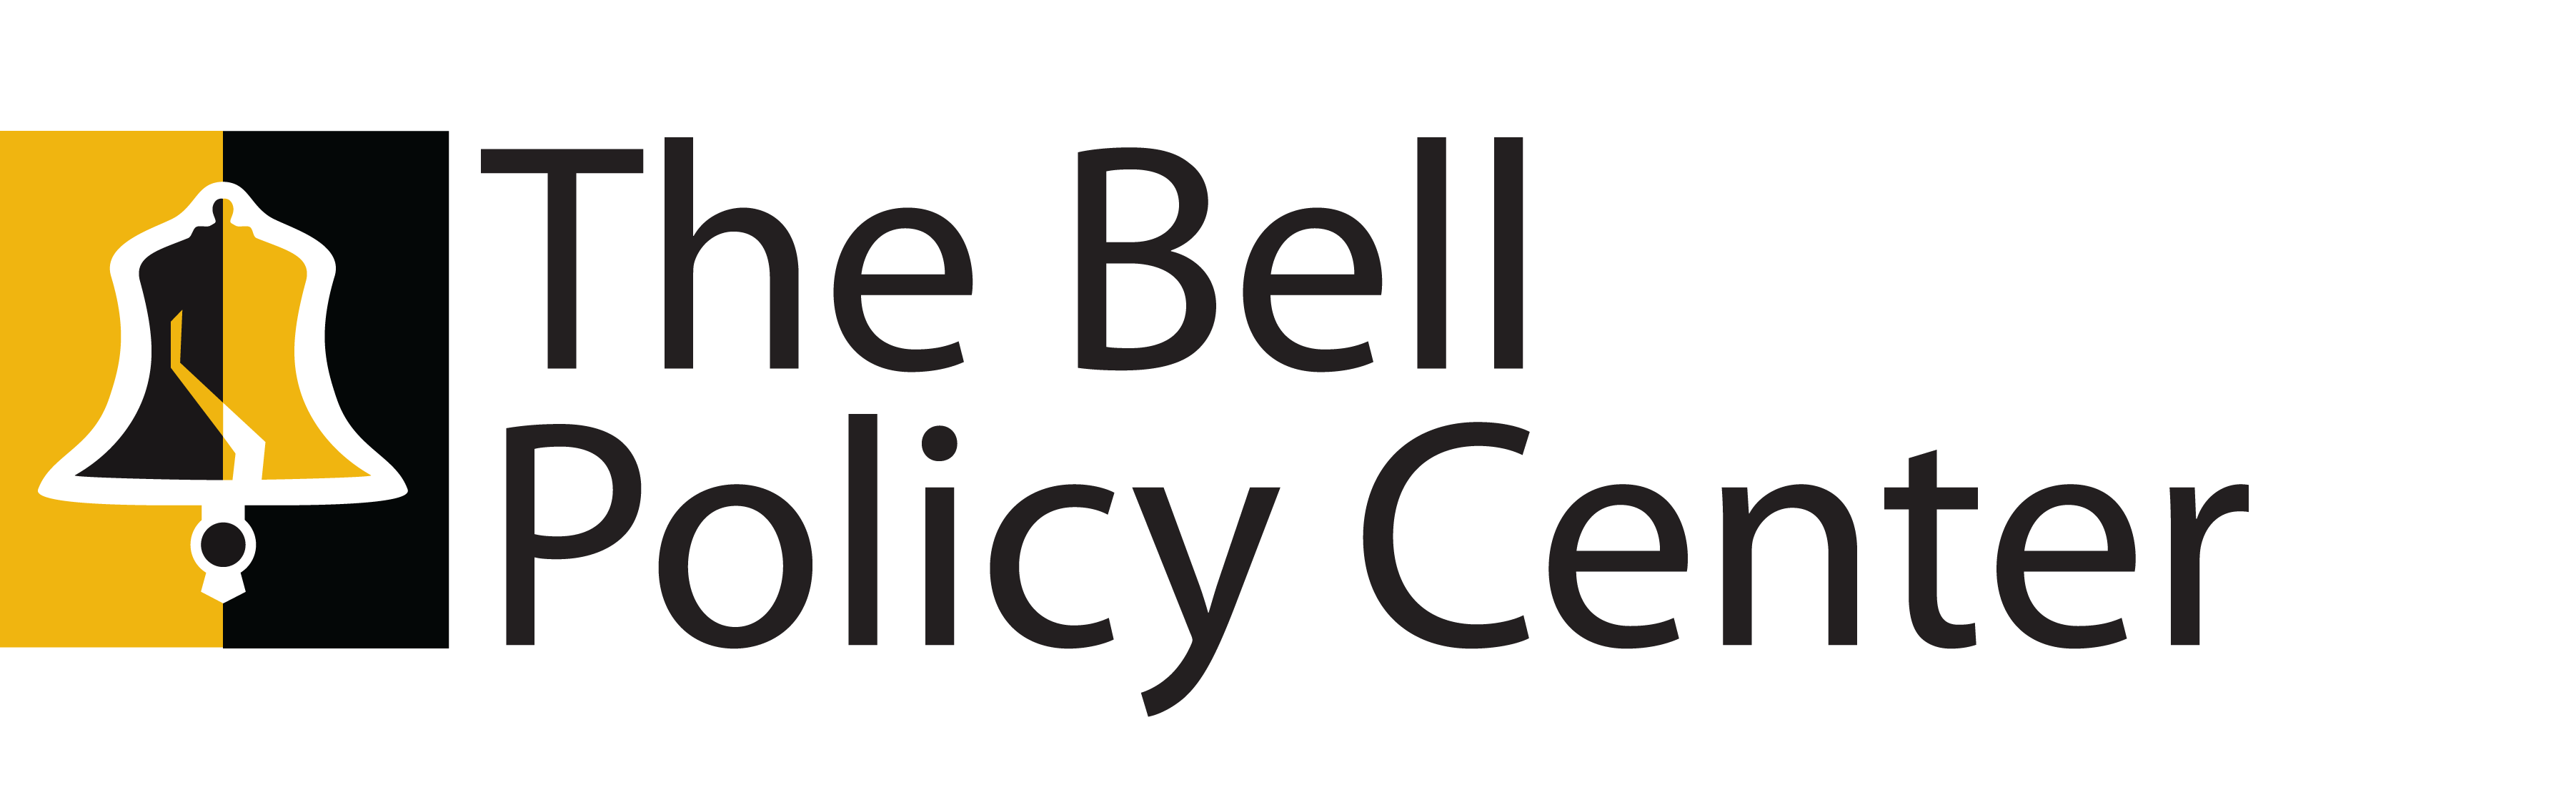 Logo of the bell policy center featuring a bell icon within a yellow rectangle next to the organization's name on a black background.